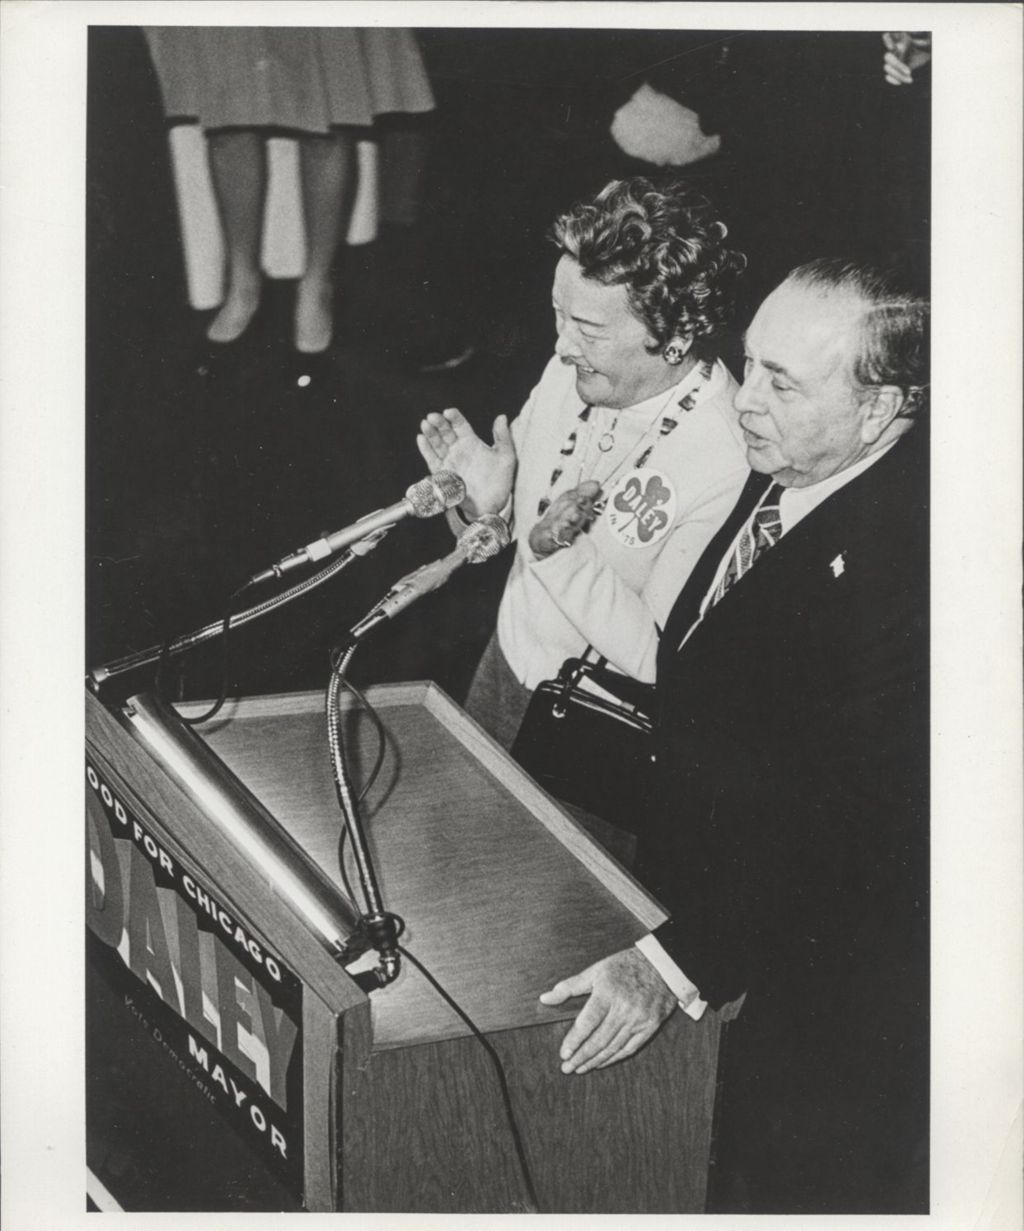 Eleanor and Richard J. Daley at a podium on election night